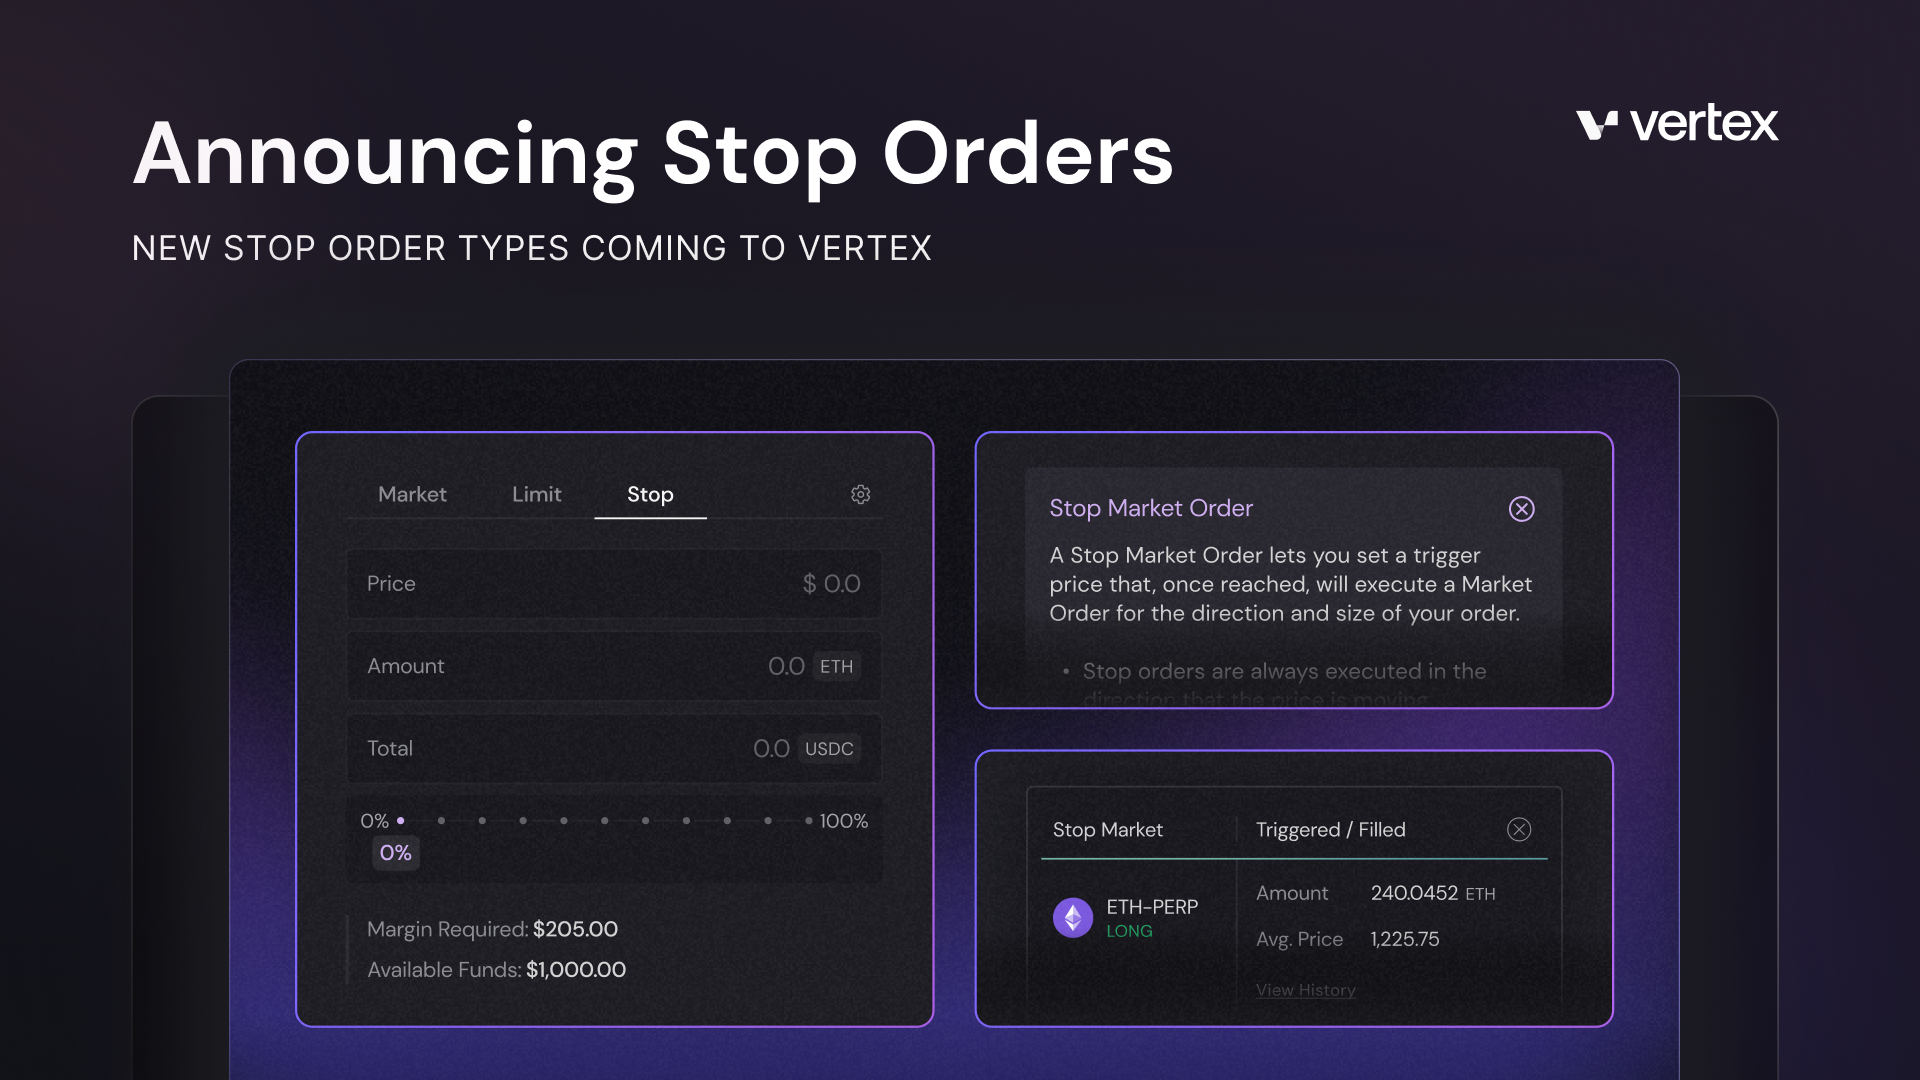 Announcing Stops Orders - The First of New Order Types Coming To Vertex